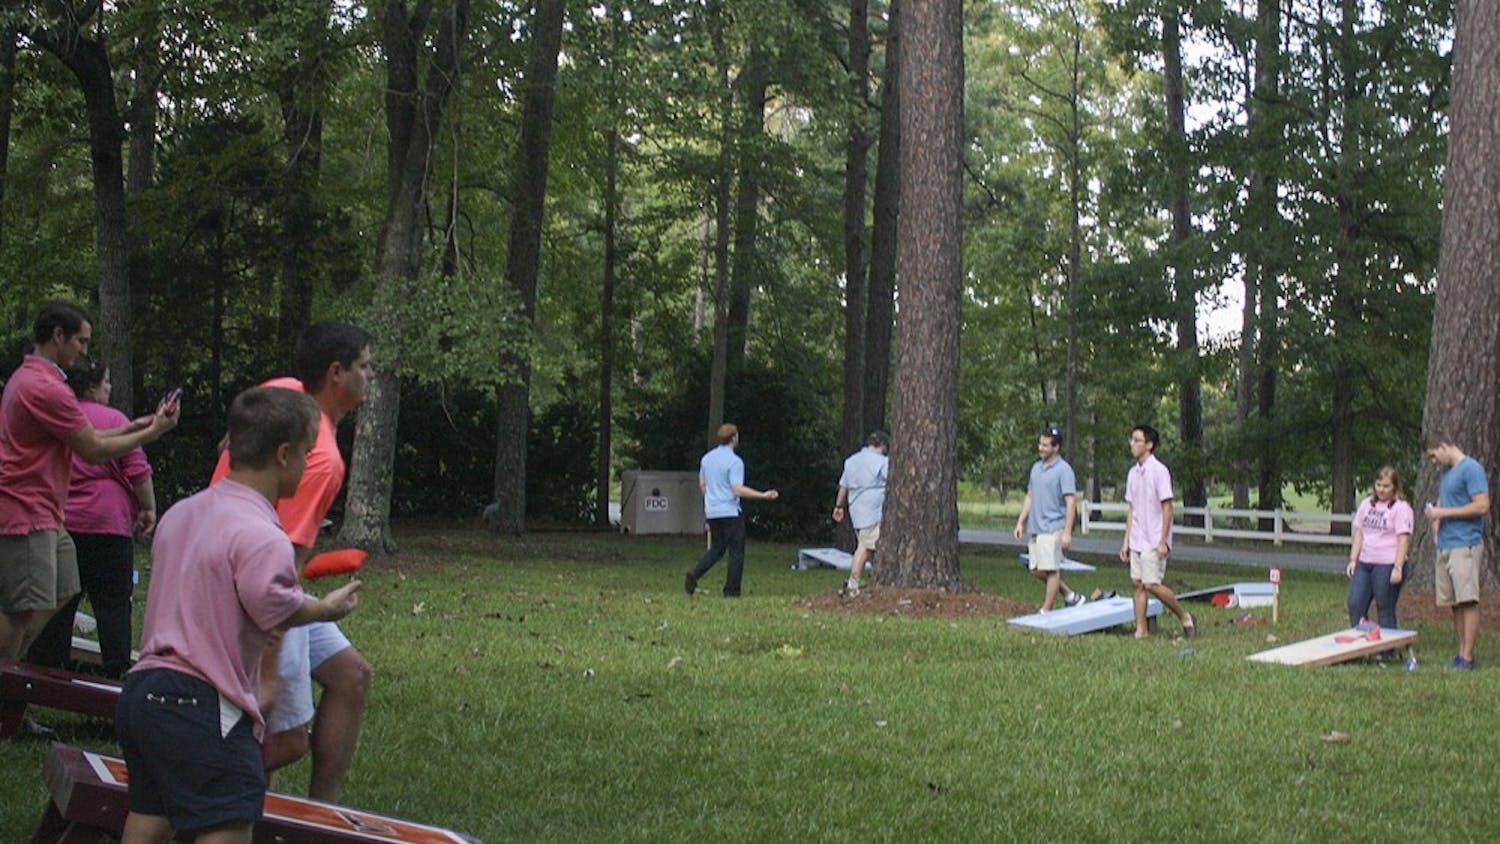 The School of Pharmacy held their first Cornhole Tournament at the Kappa Psi house on Friday to start off Breast Cancer Awareness Month. 